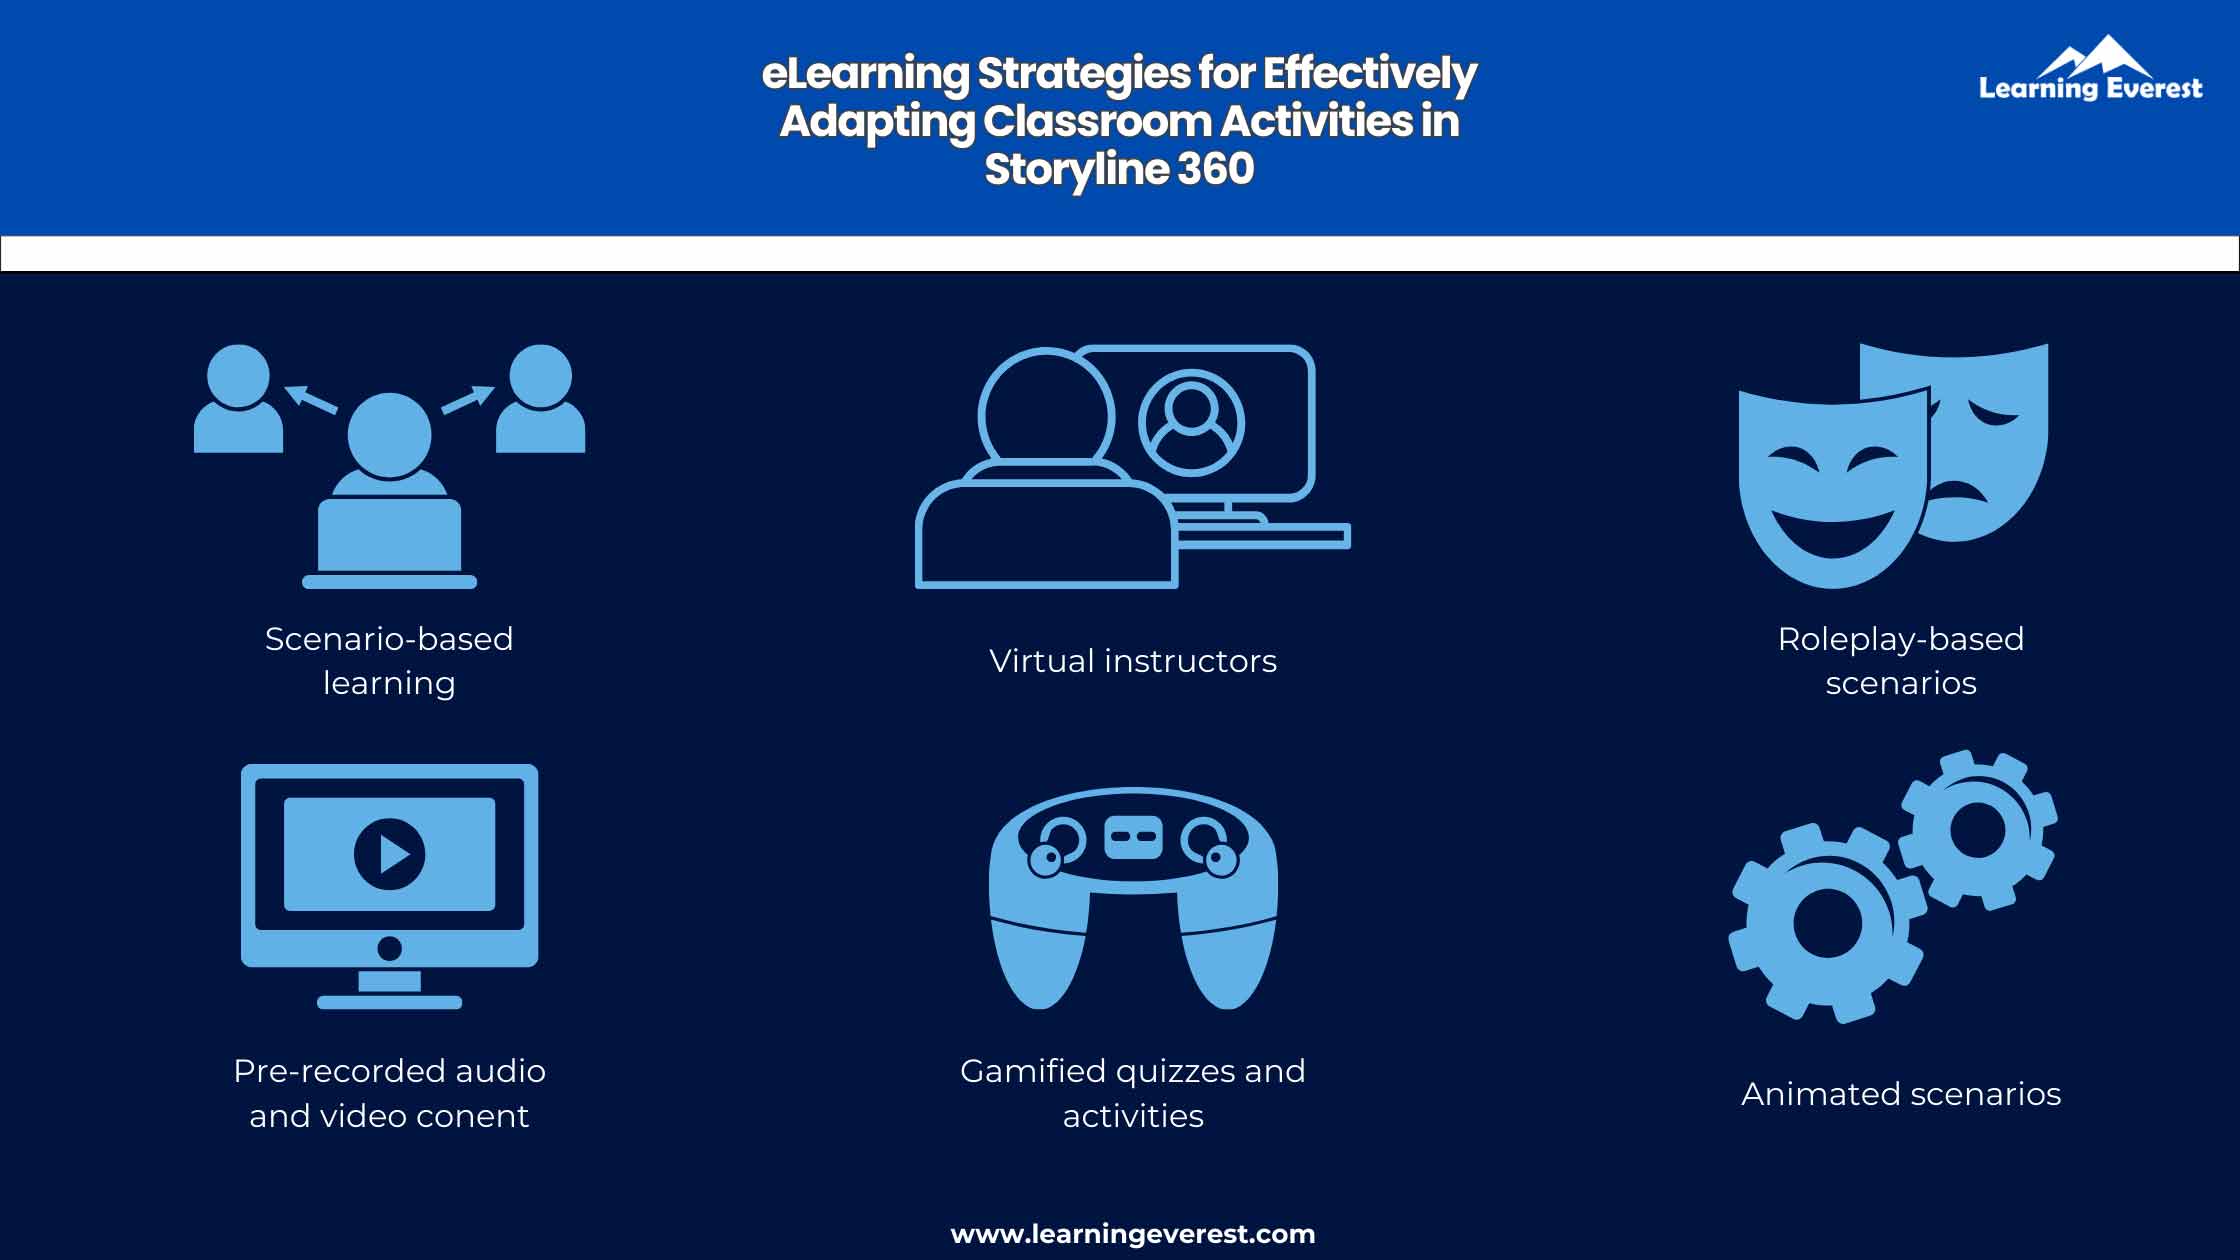 eLearning Strategies for Effectively Adapting Classroom Activities in Storyline 360